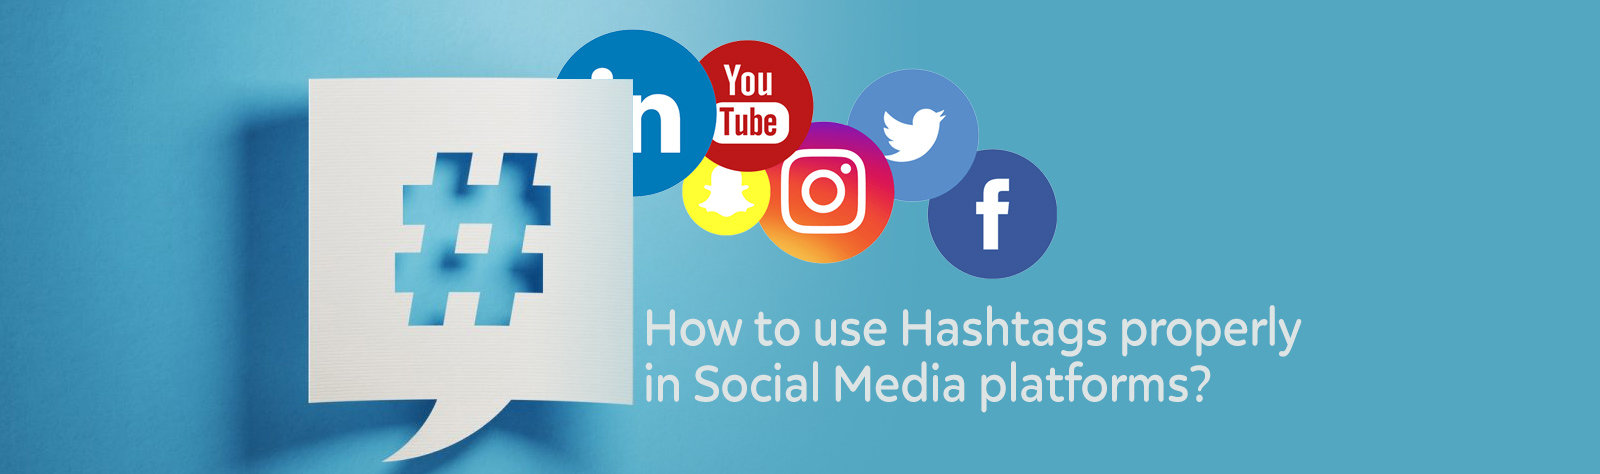 How to use Hashtags properly in Social Media platforms?